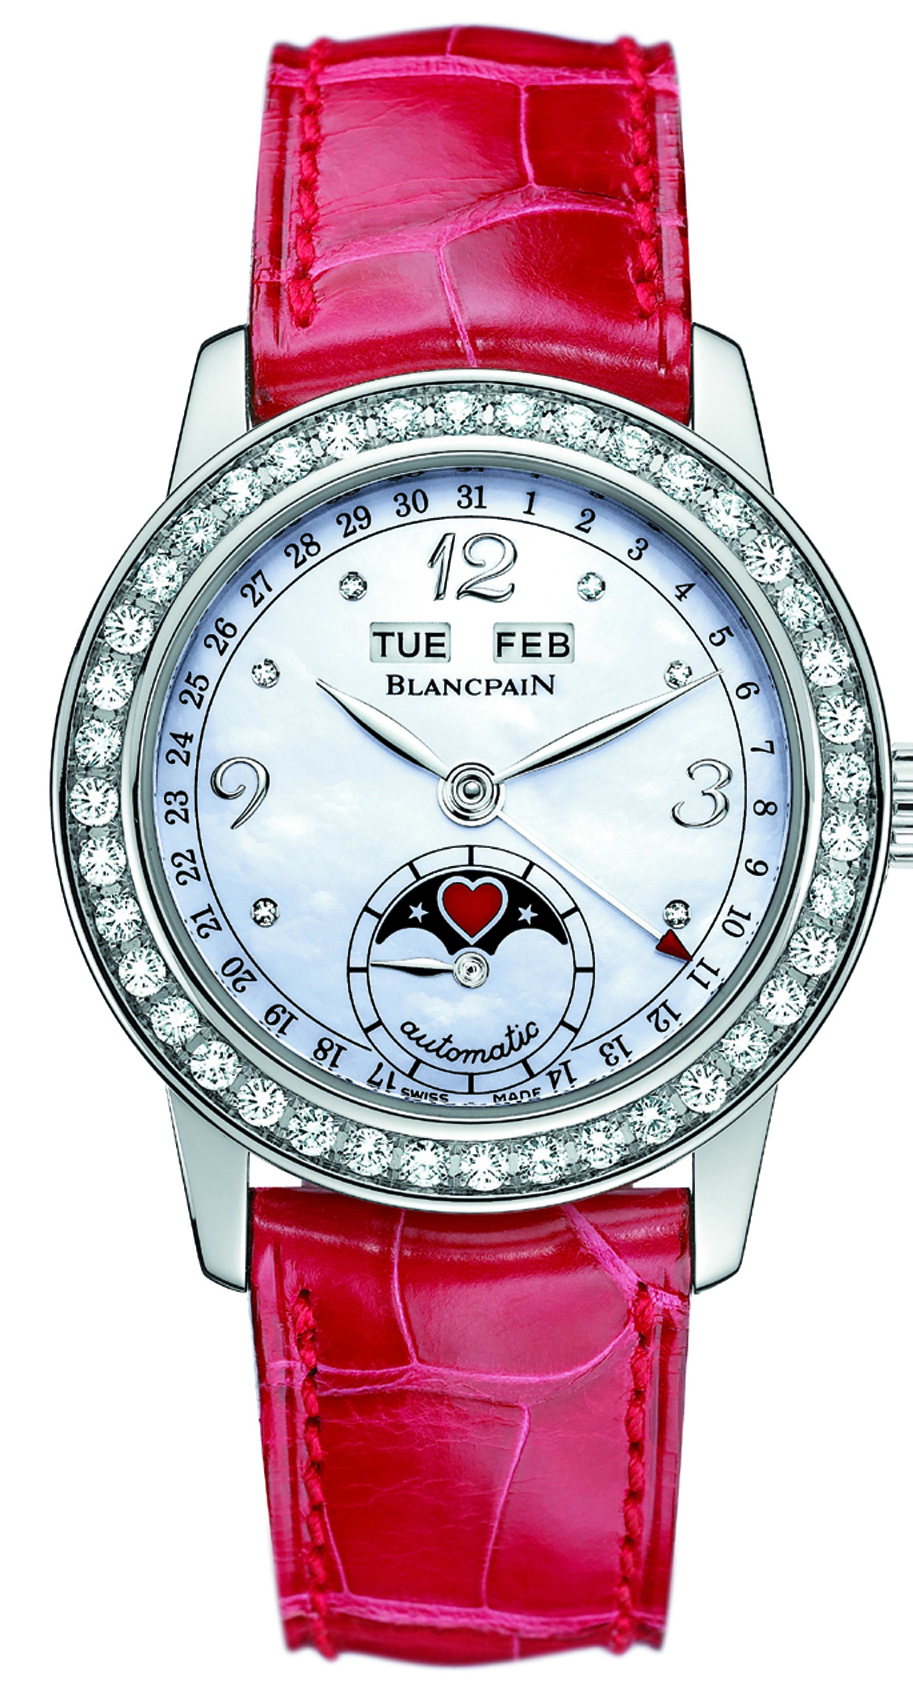 The 2003 version of the Blancpain St. Valentine’s Day Special Edition.